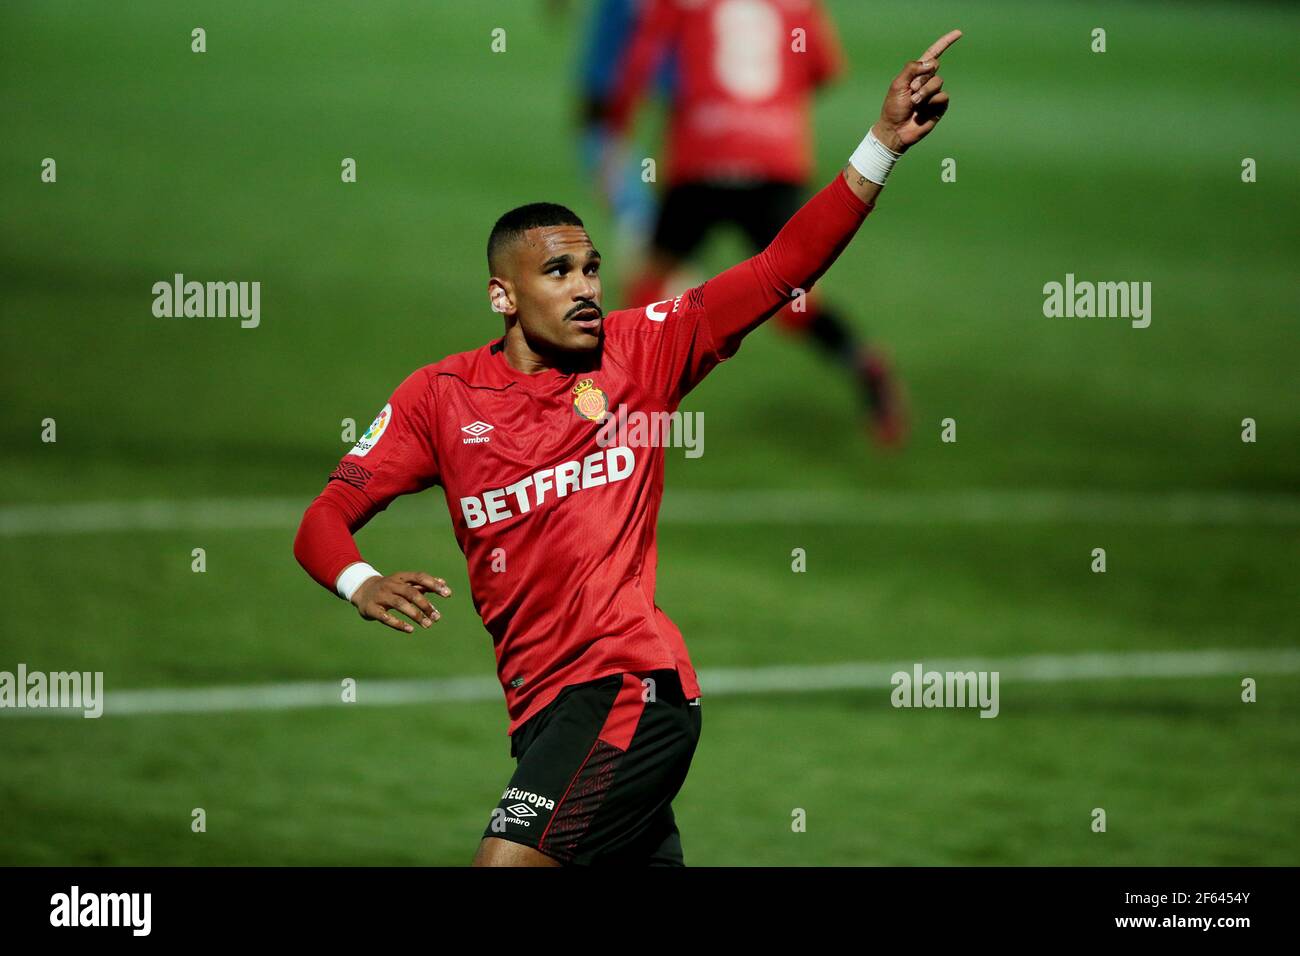 Fuenlabrada, Madrid, Spain, 29.03.2021C. F. Fuenlabrada against R. C. D. Mallorca match of the second division of Spanish soccer in match 31. Mallorca player Mboula Celebrate your goal Final score 4-1 winner Fuenlabrada with goals from the players Oscar Pichi 13 y 38  Nteka 41  and Pathe Ciss 73  Mallorca scores his player Mboula 56  Photo: Juan Carlos Rojas/Picture Alliance | usage worldwide Stock Photo